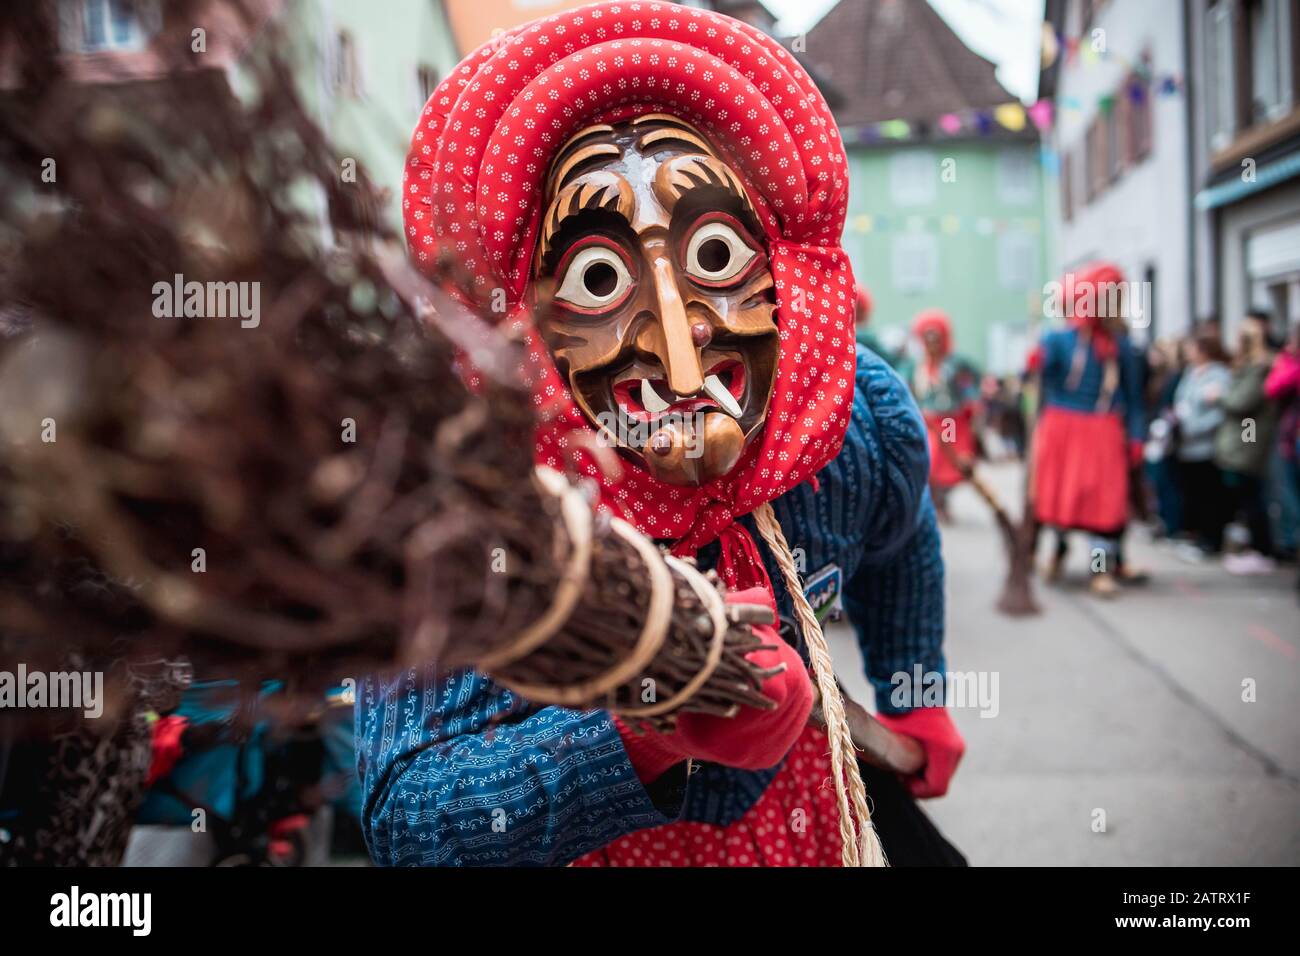 Kandel witch from Waldkirch - funny witch with a red headscarf, lifts up the broom. During the carnival parade in Staufen, southern Germany Stock Photo